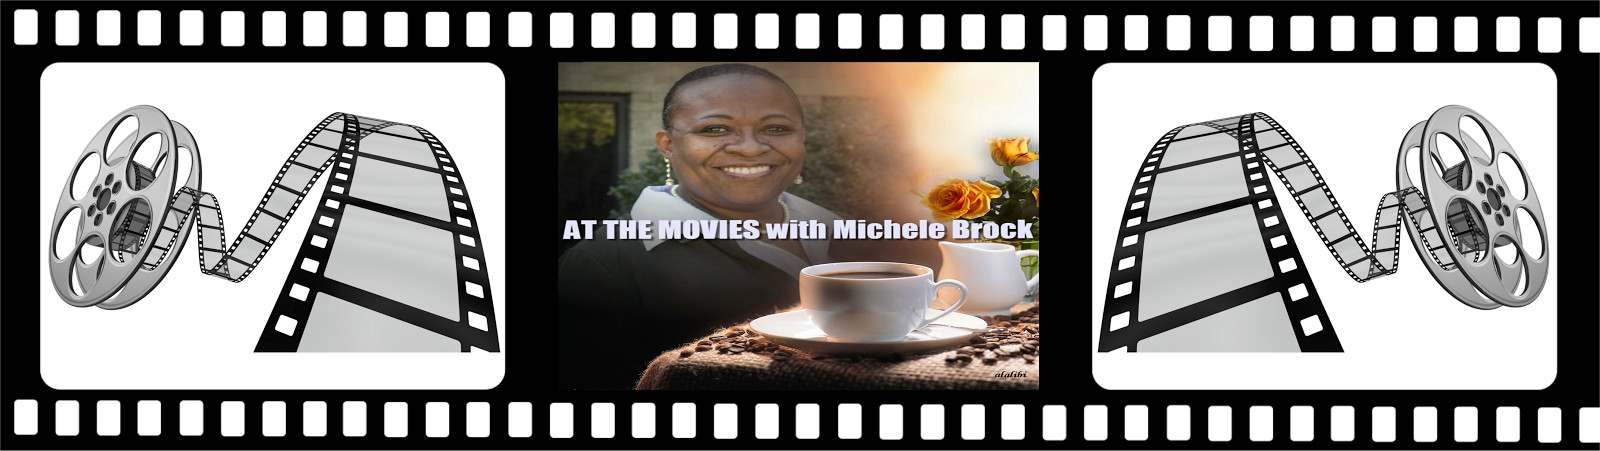 AT THE MOVIES with Michele Brock